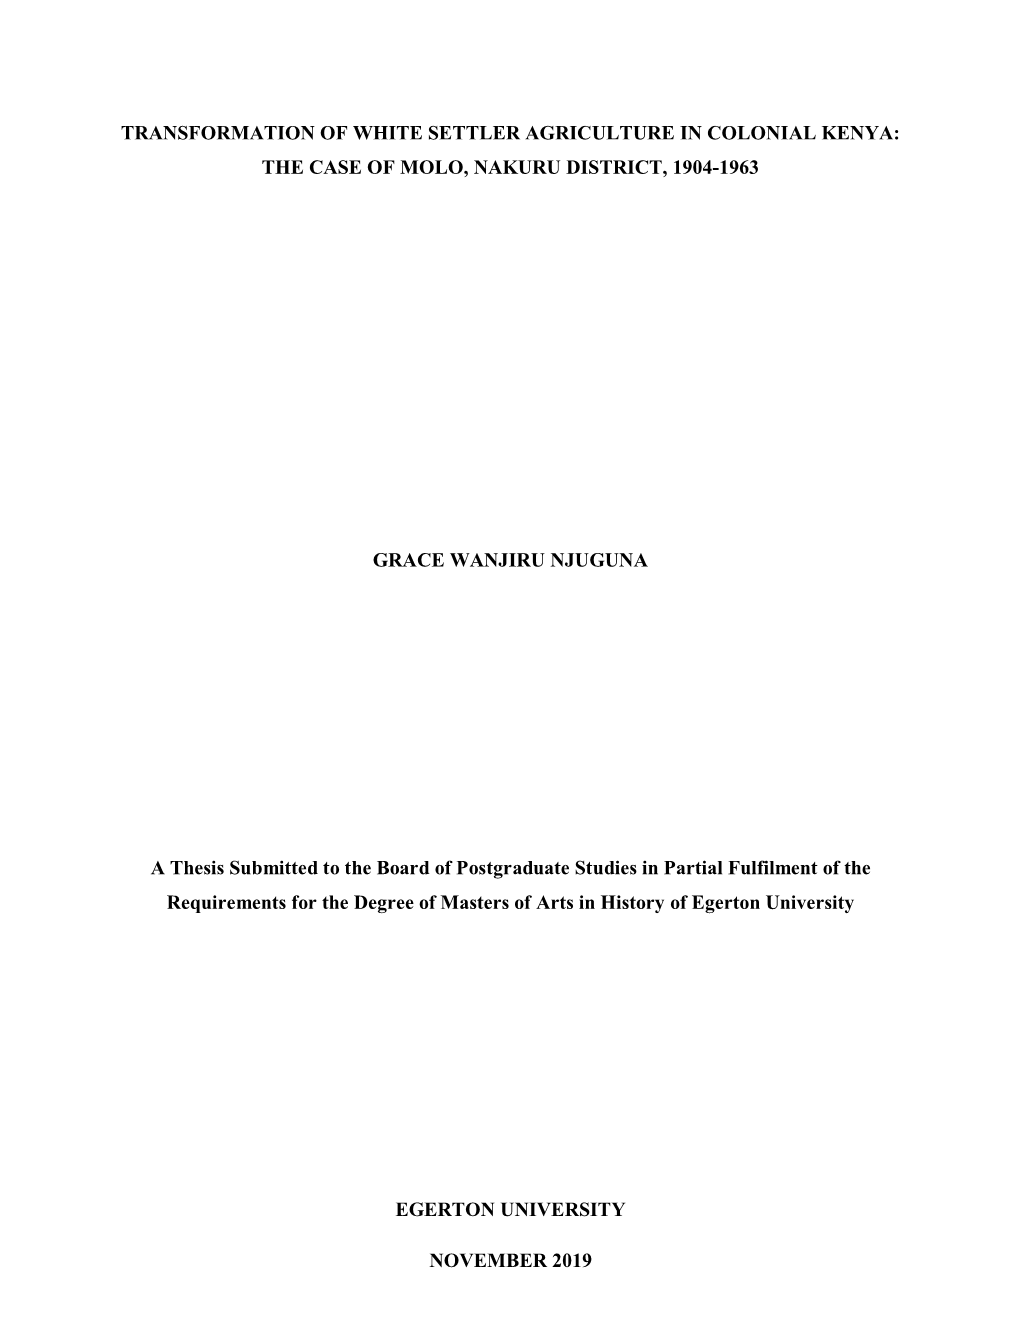 Transformation of White Settler Agriculture in Colonial Kenya: the Case of Molo, Nakuru District, 1904-1963